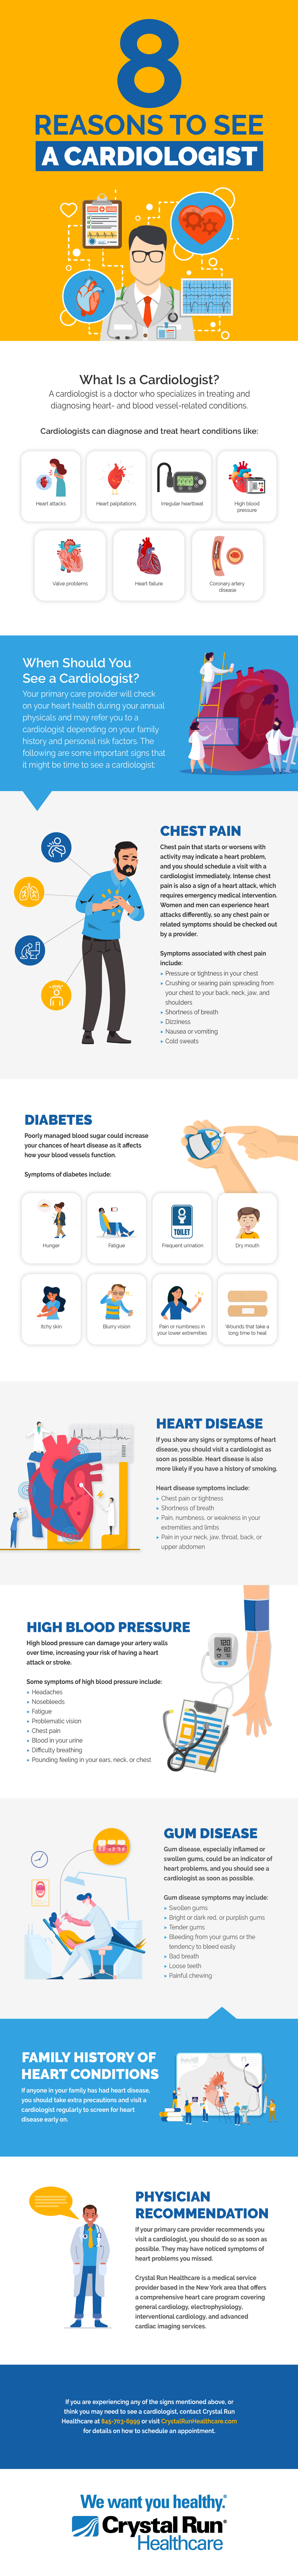 Reasons to See a Cardiologist Infographic